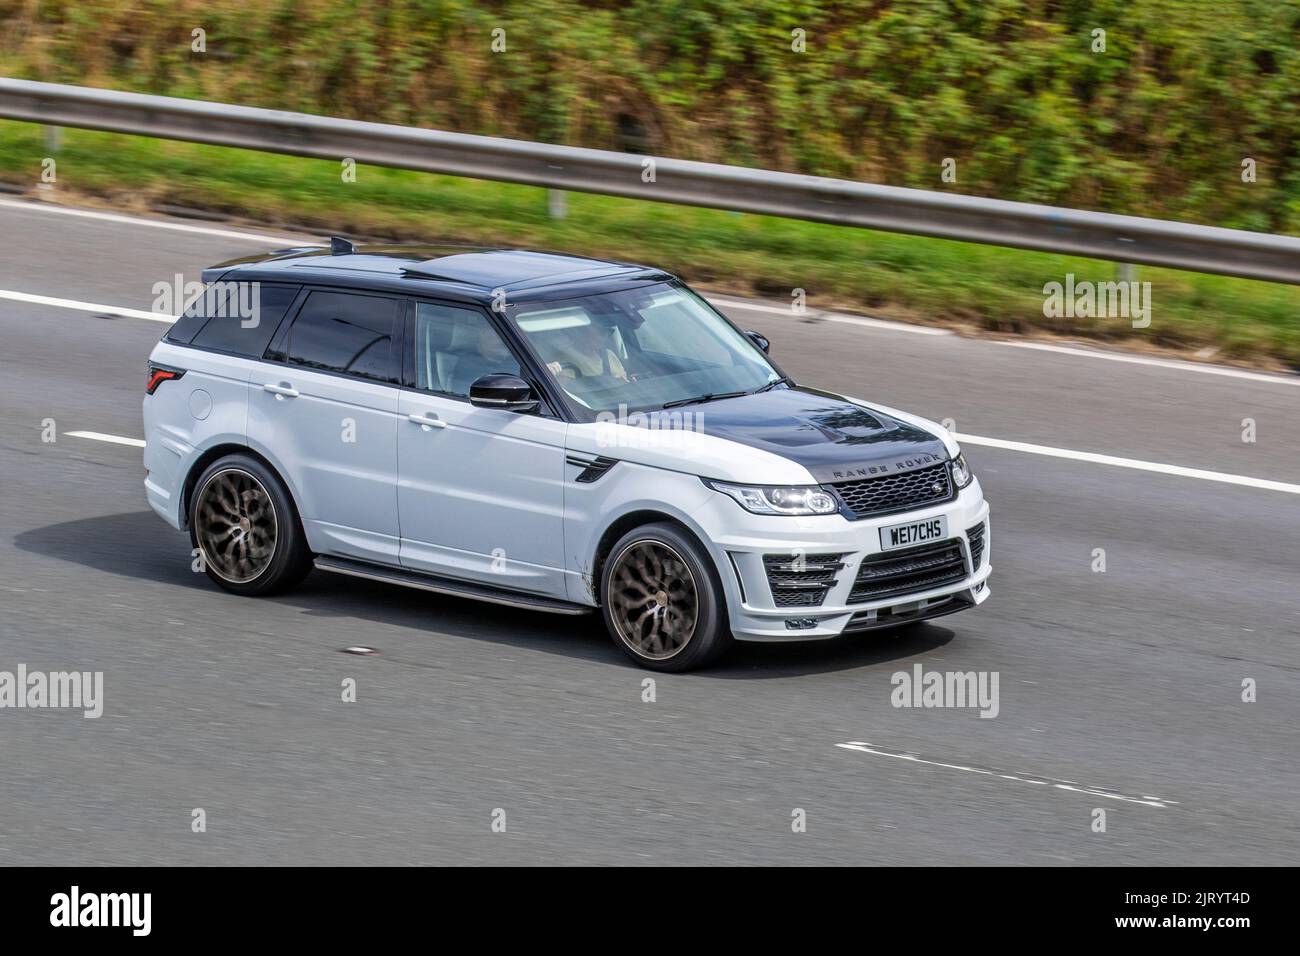 2017 white black LAND ROVER RANGE ROVER SPORT SDV6 HSE   SDV6 306 Commandshift 2993 cc 8 speed automatic; travelling on the M6 motorway, UK Stock Photo